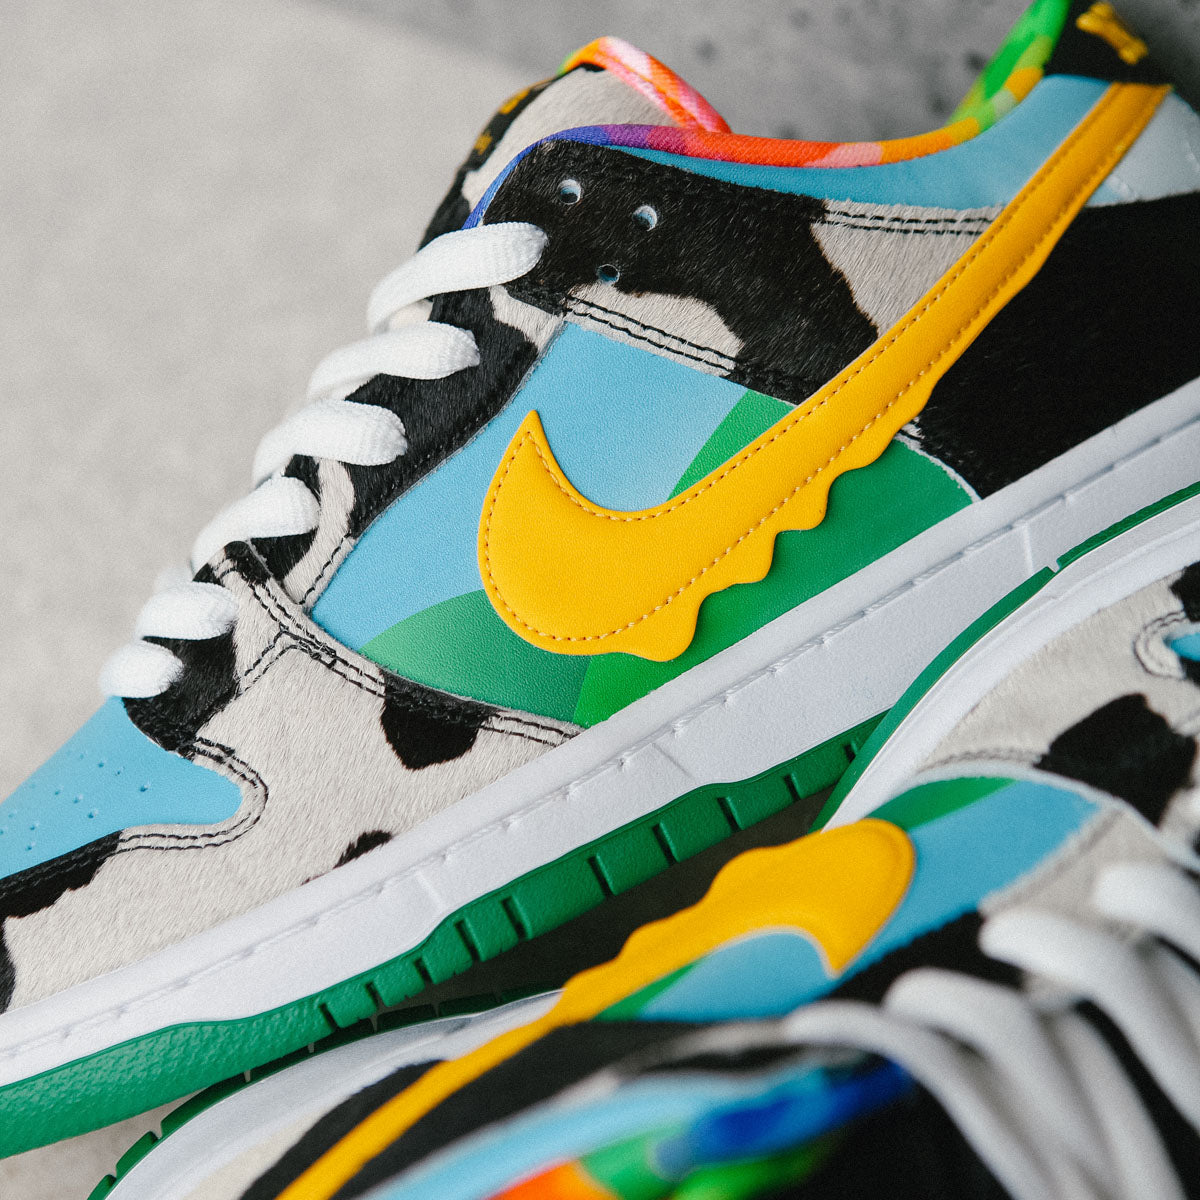 Nike SB x Ben & Jerry's 'Chunky Dunky' Dunk Low Pro | Releases.Flatspot